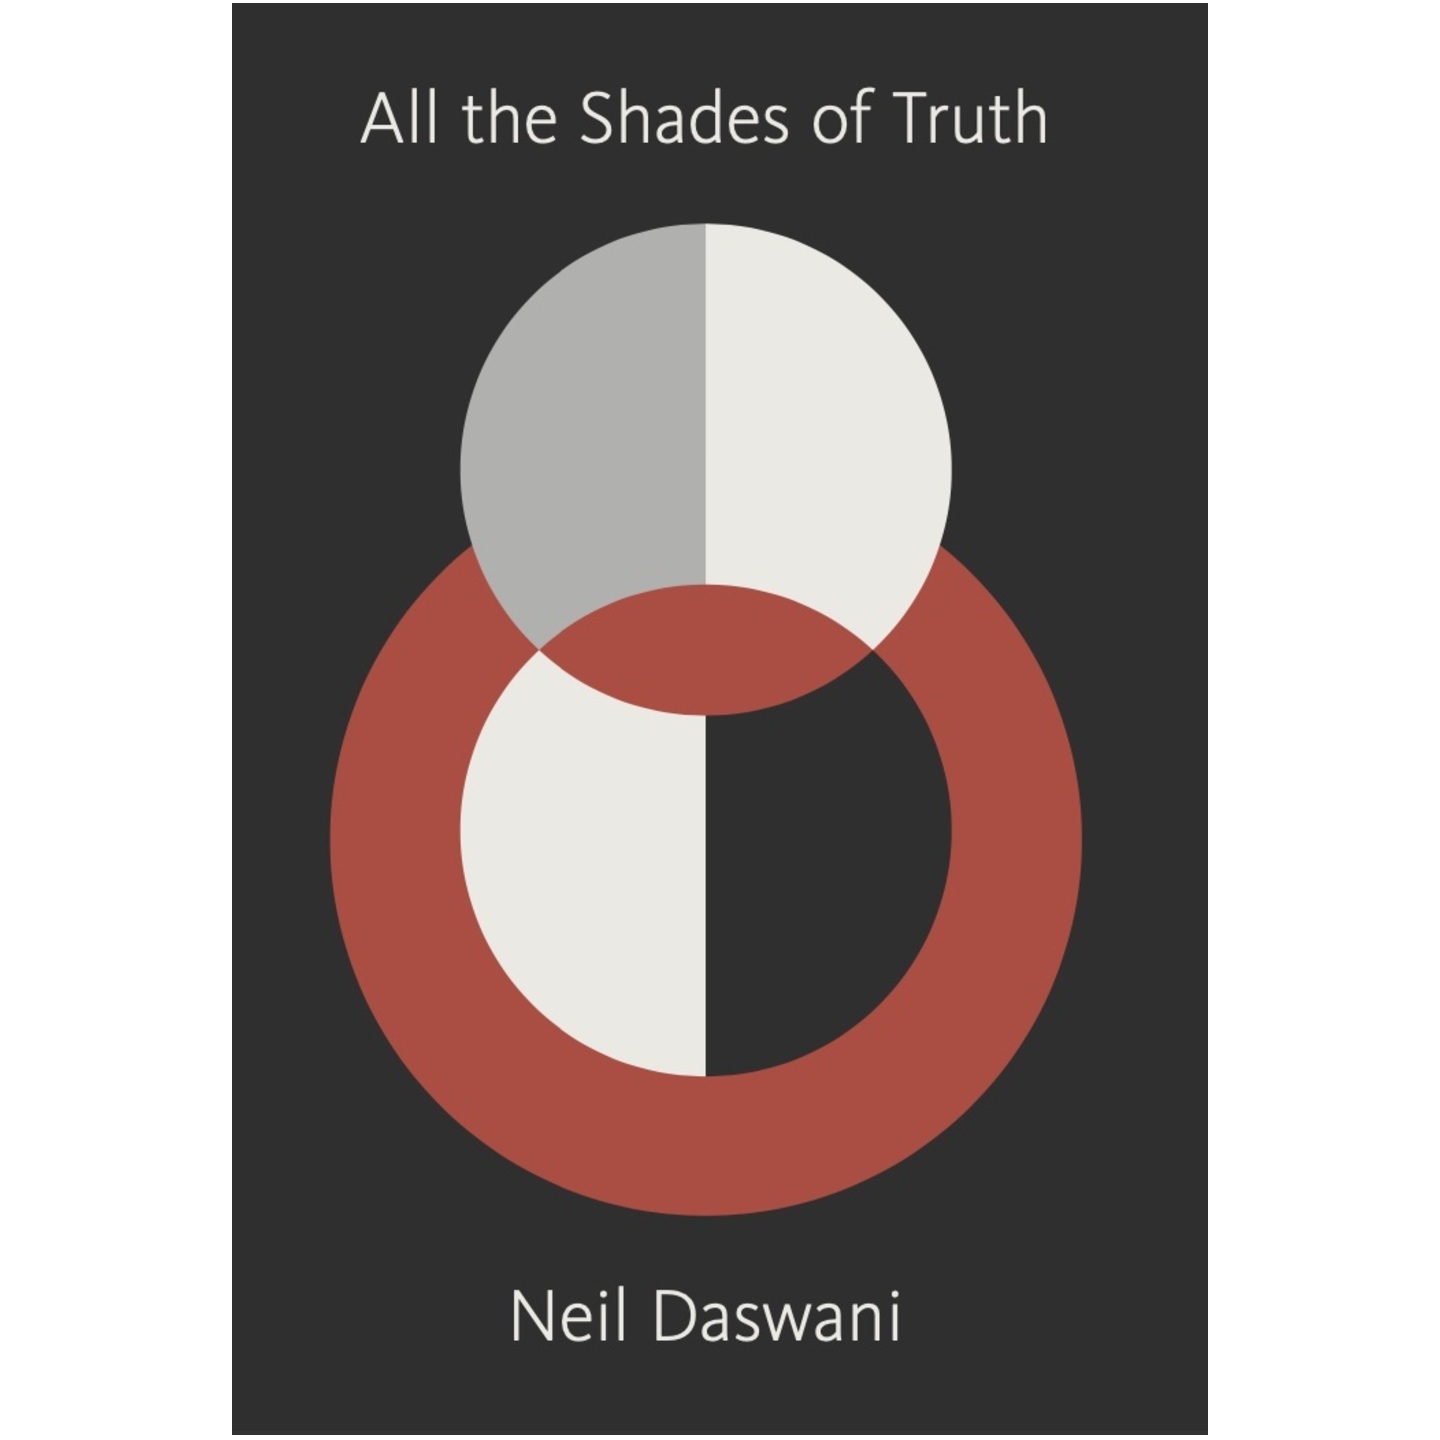 All The Shades of Truth by Neil Daswani